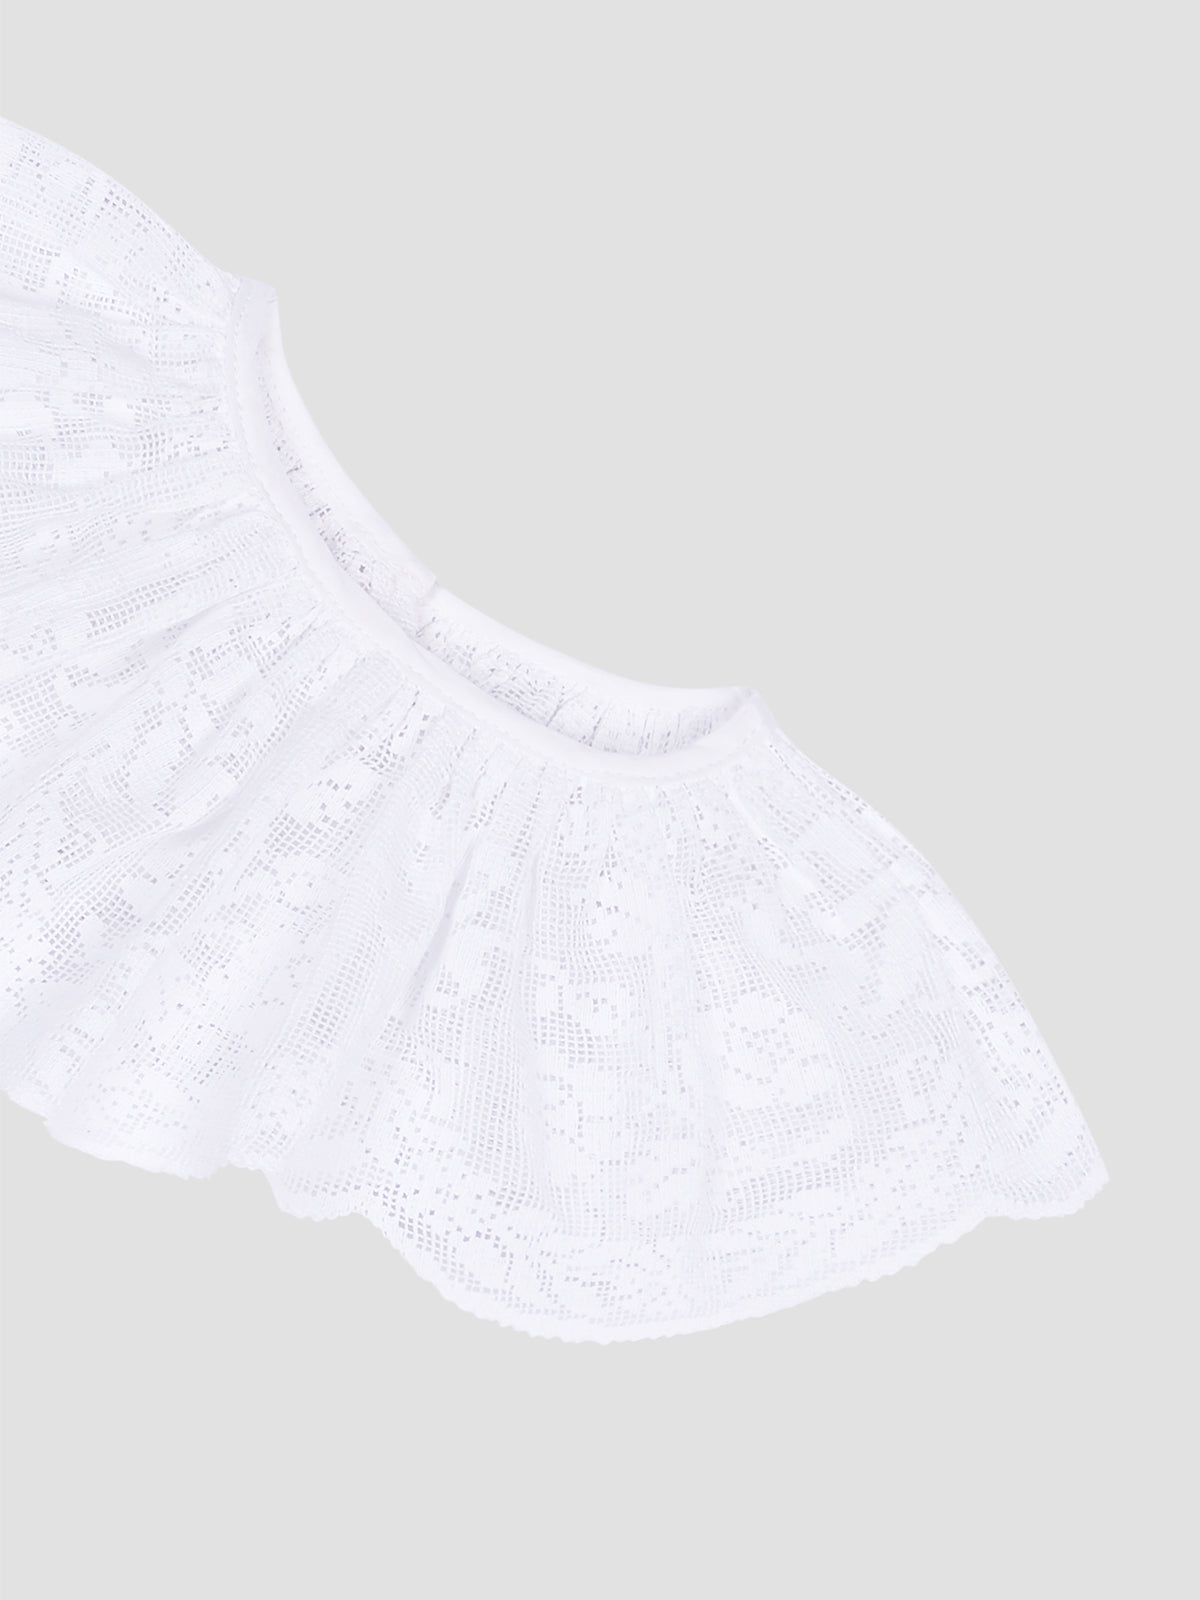 Cancan made of white lace.&nbsp;